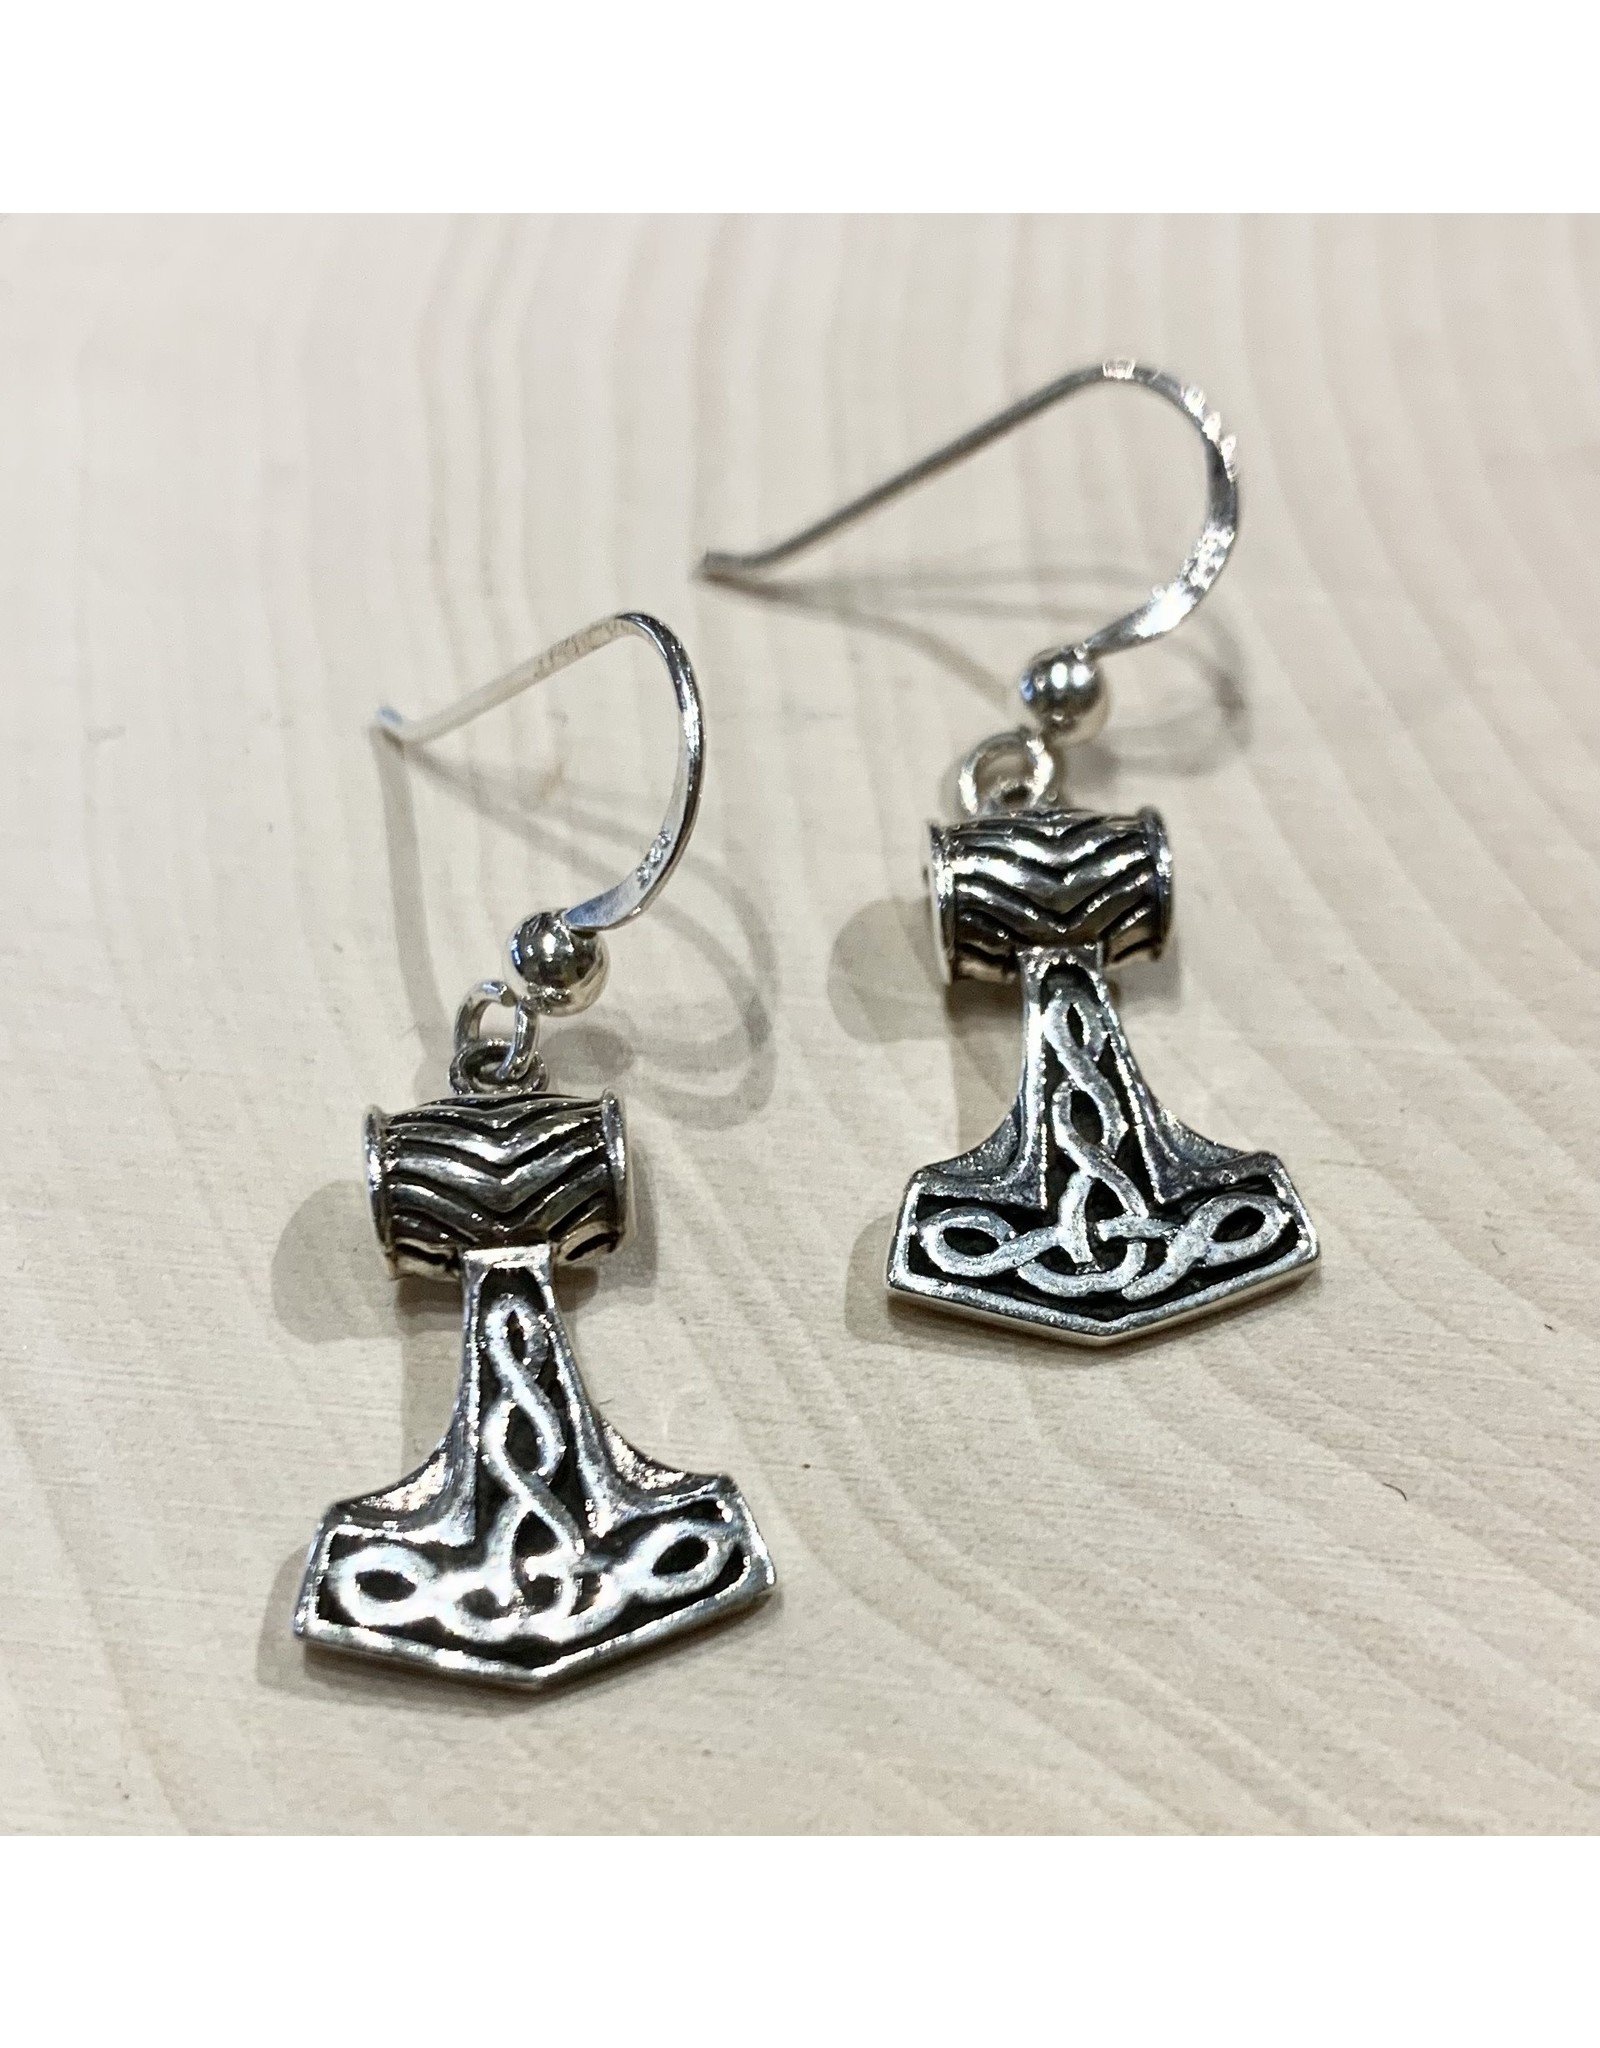 Perun's Hammer Earrings with Runic Knots